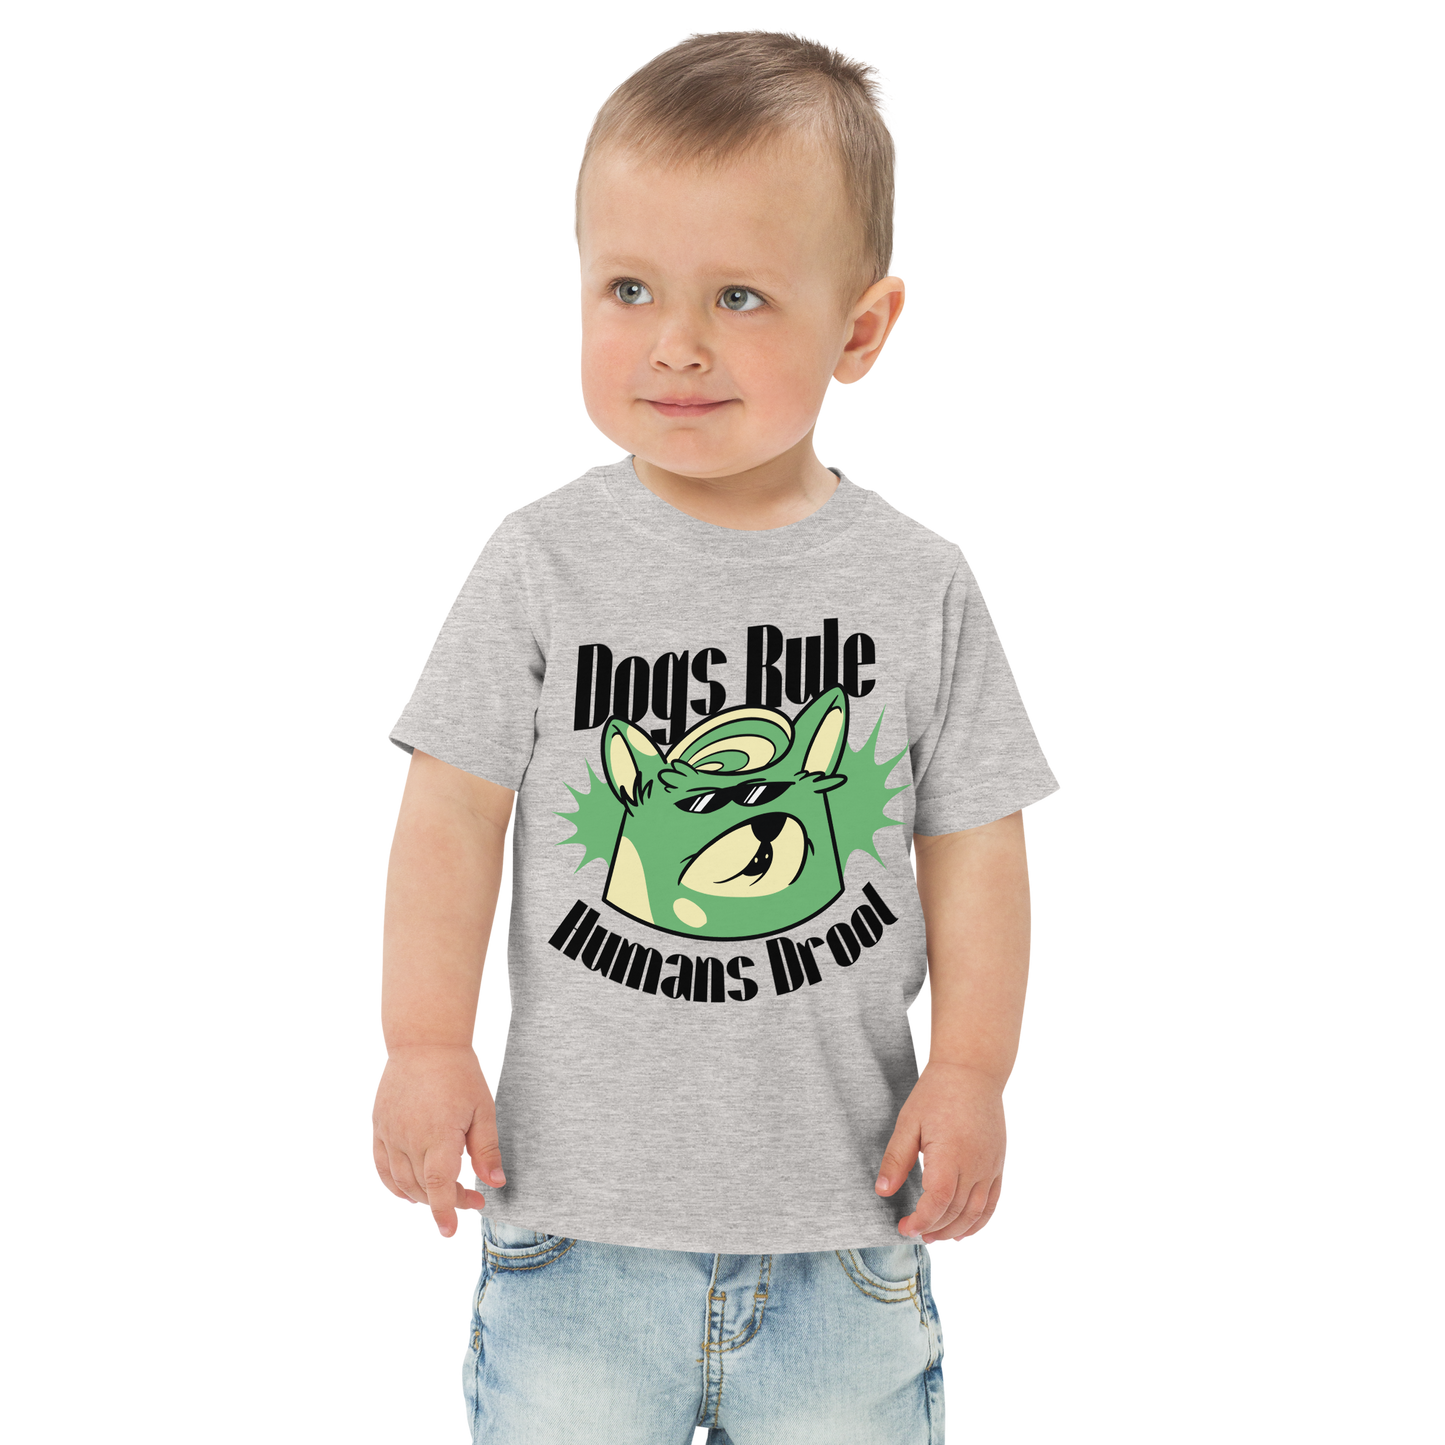 Dogs rule | Toddler jersey t-shirt